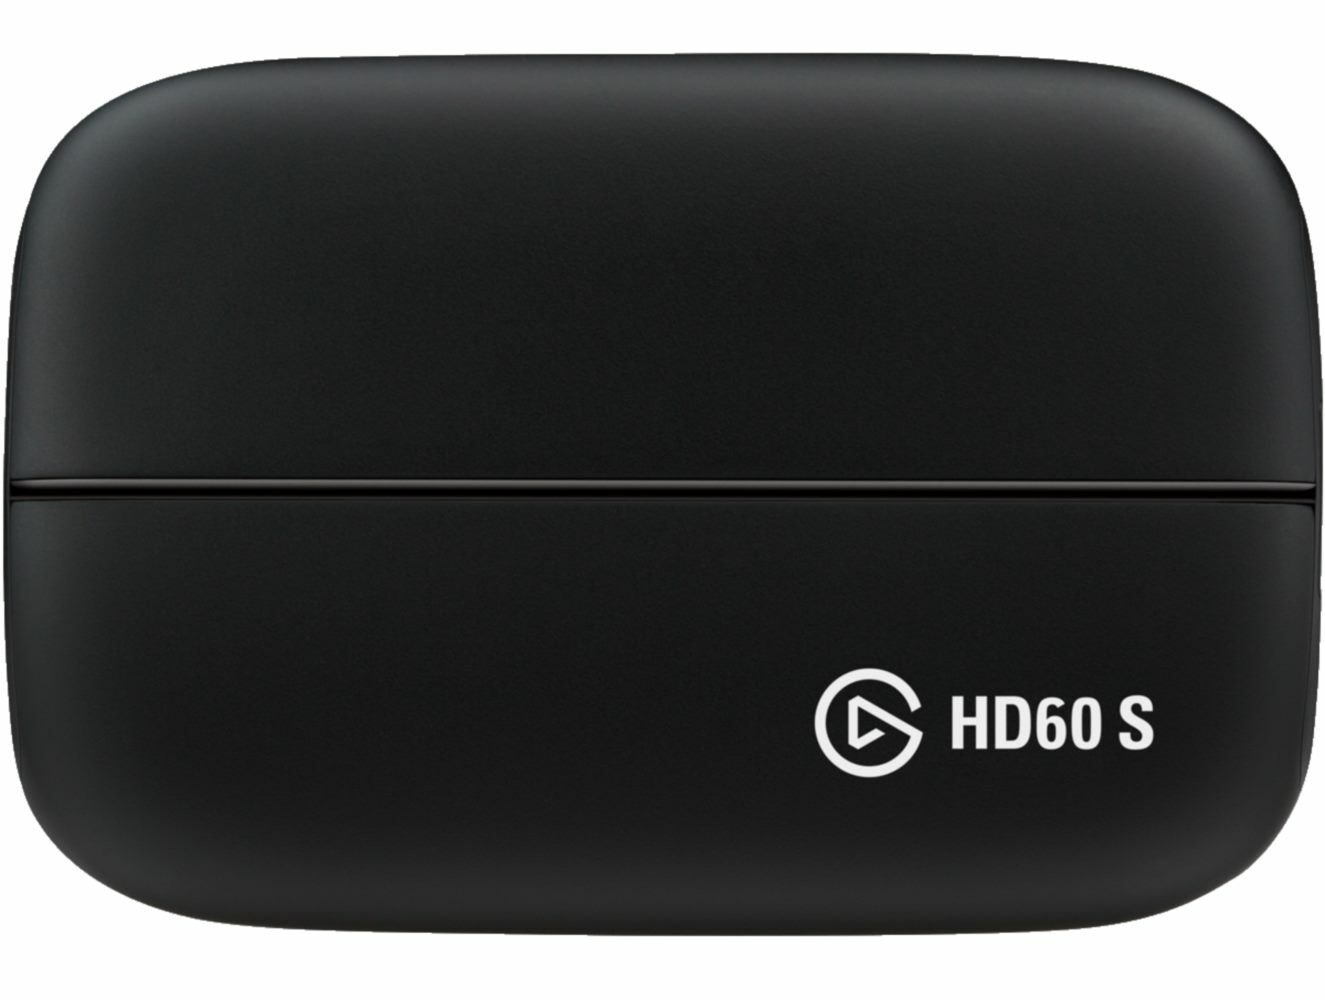 Elgato HD60 S Game Capture Review